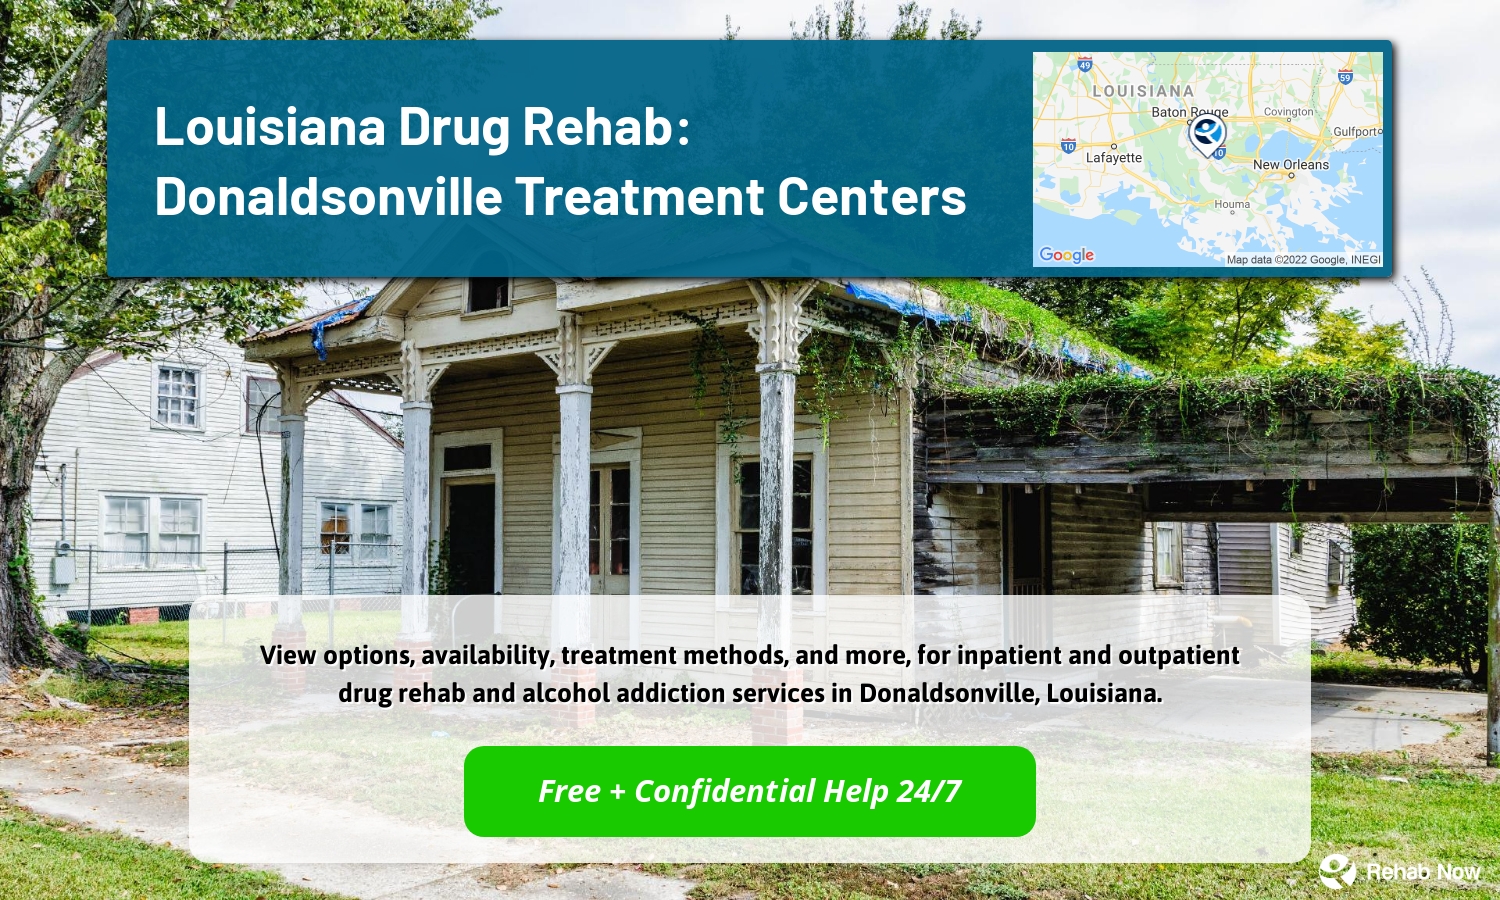 View options, availability, treatment methods, and more, for inpatient and outpatient drug rehab and alcohol addiction services in Donaldsonville, Louisiana.